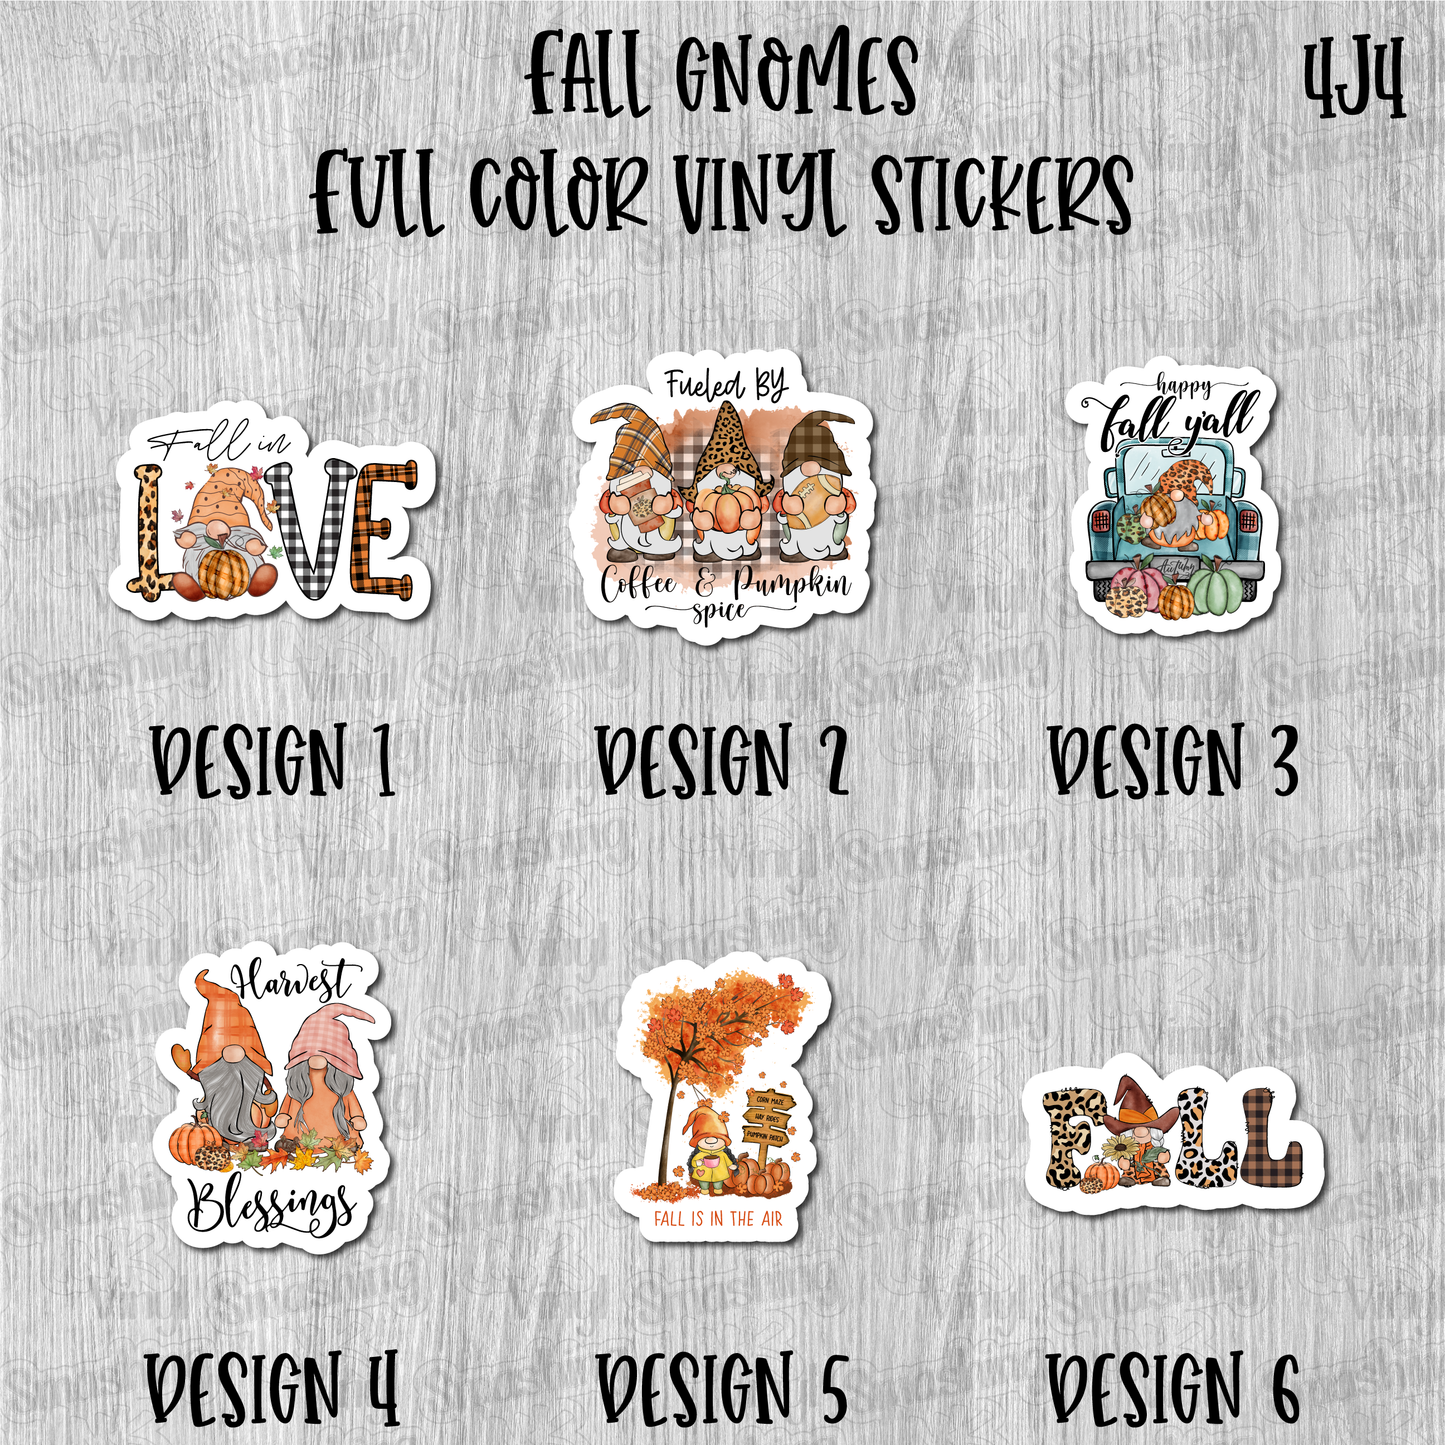 Fall Gnomes - Full Color Vinyl Stickers (SHIPS IN 3-7 BUS DAYS)